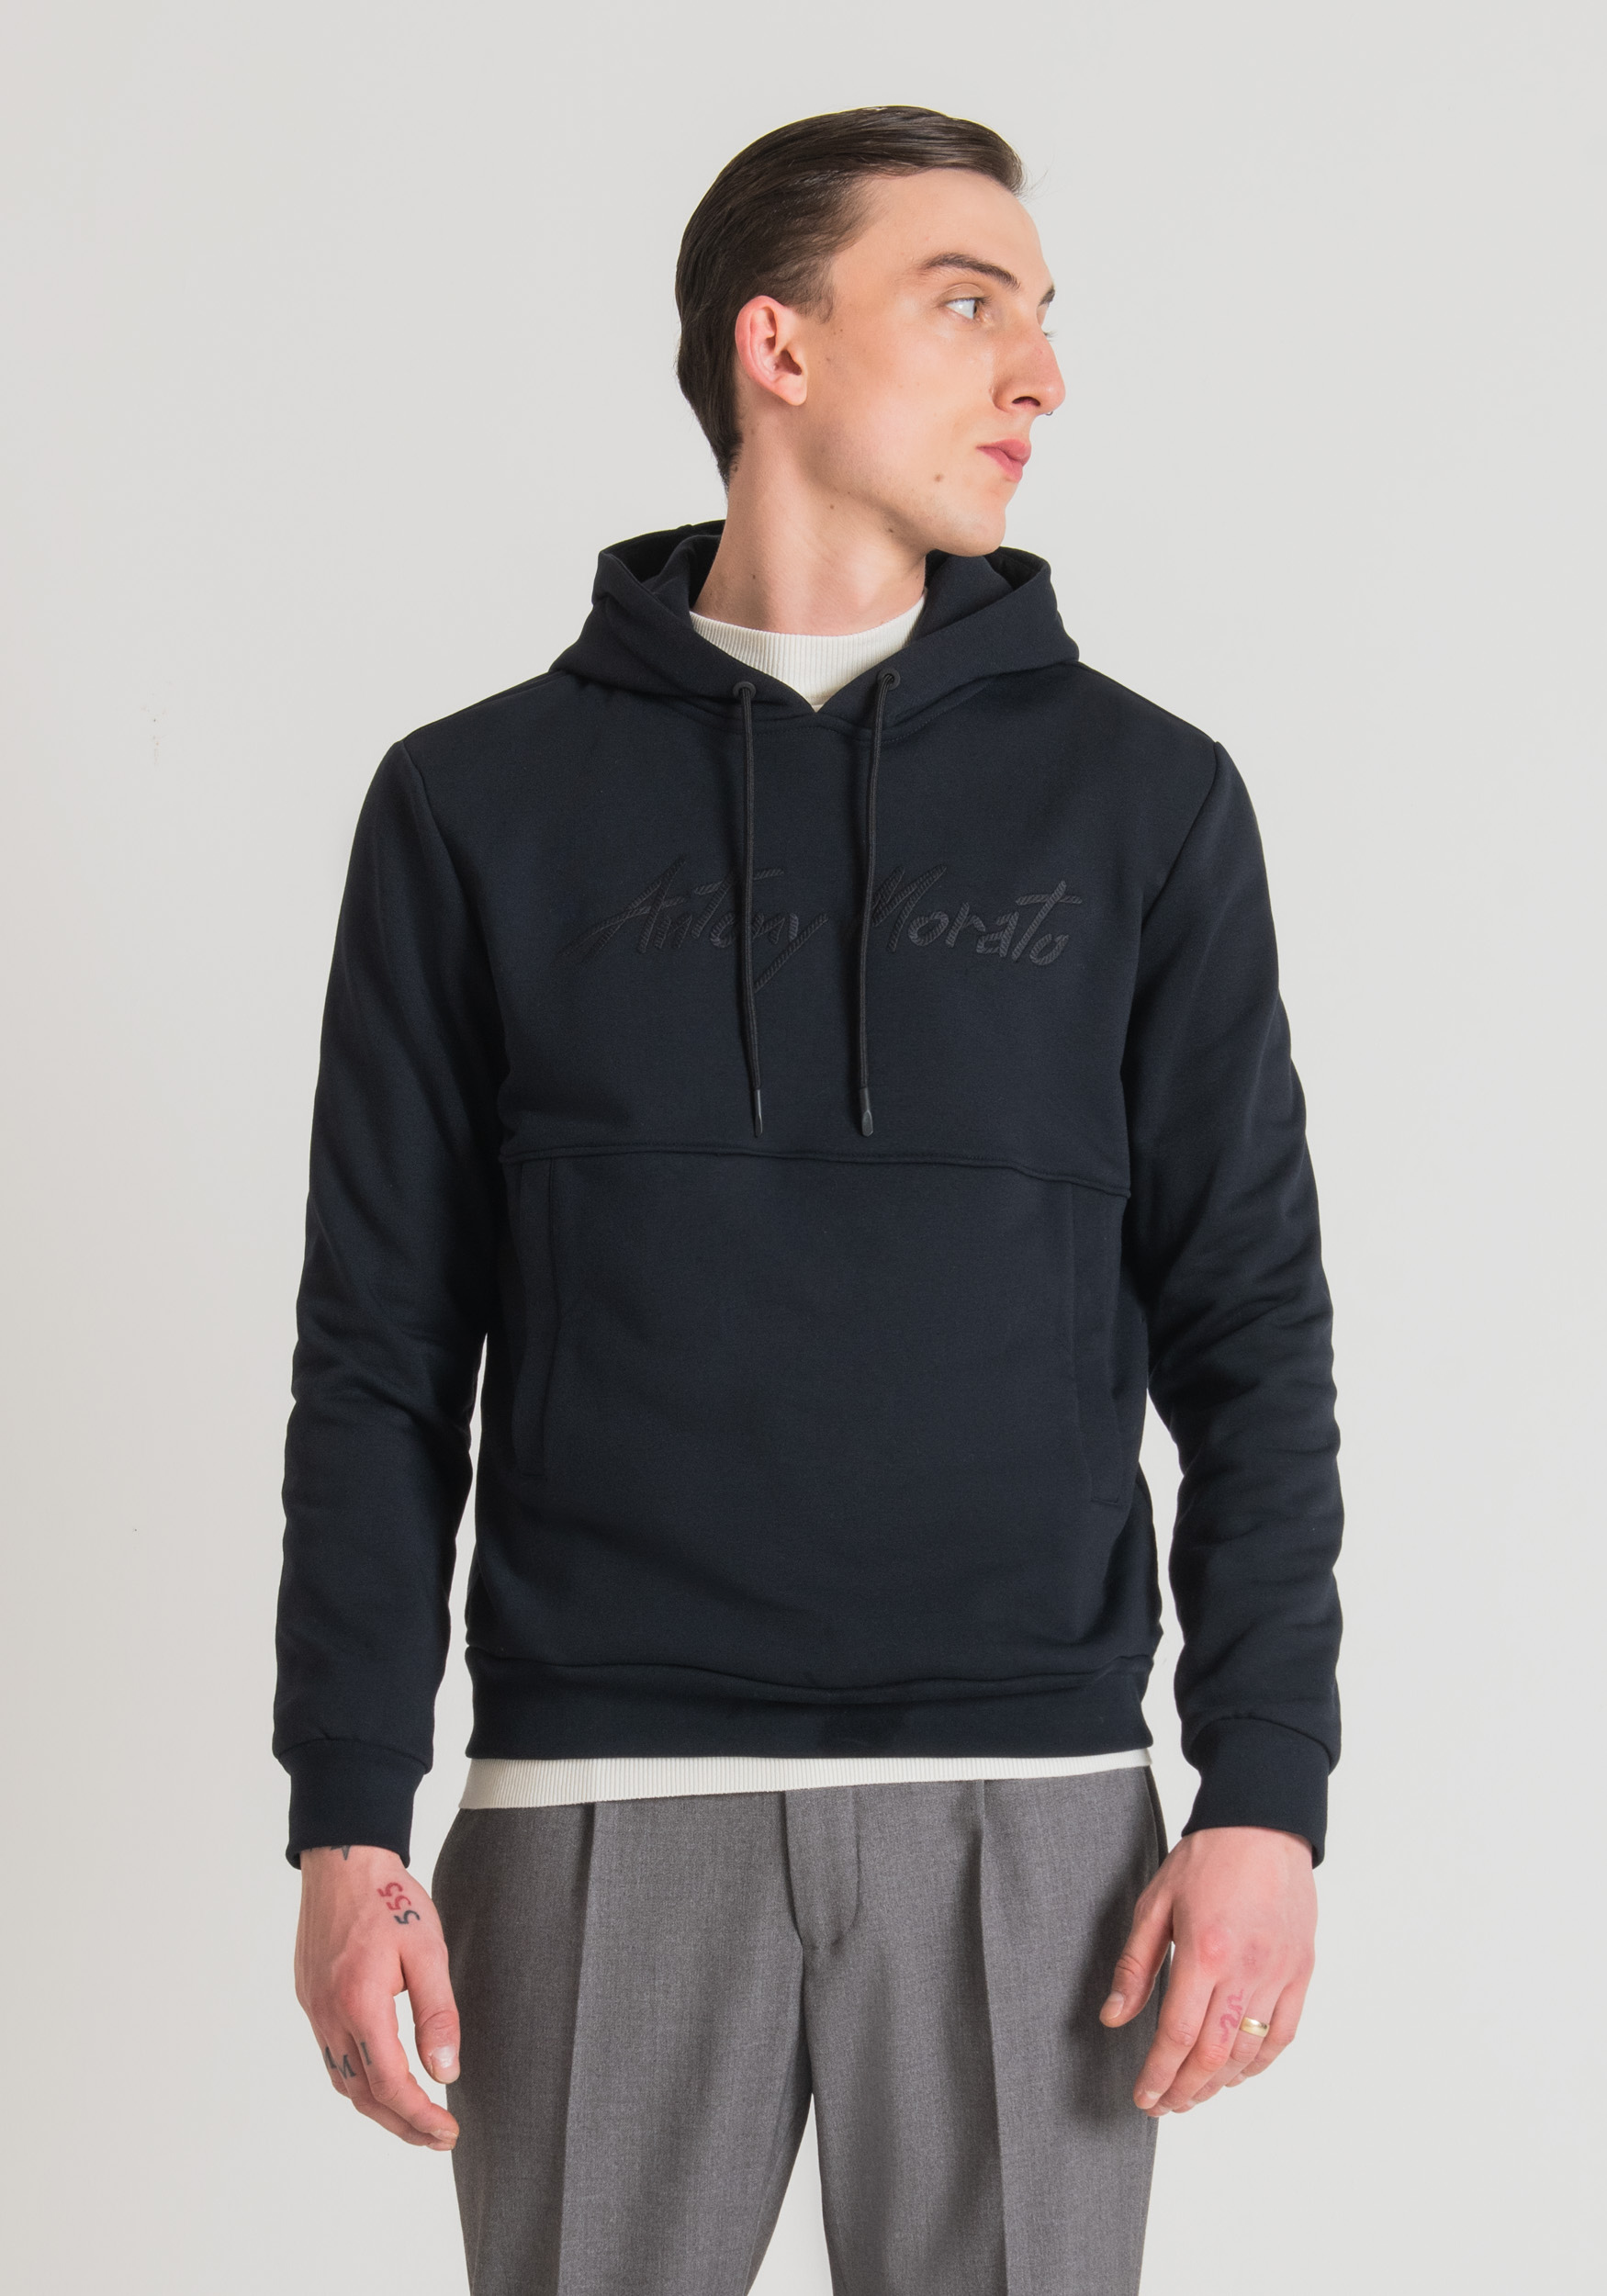 REGULAR SWEATSHIRT IN COTTON BLEND FABRIC WITH EMBROIDERED LOGO ...